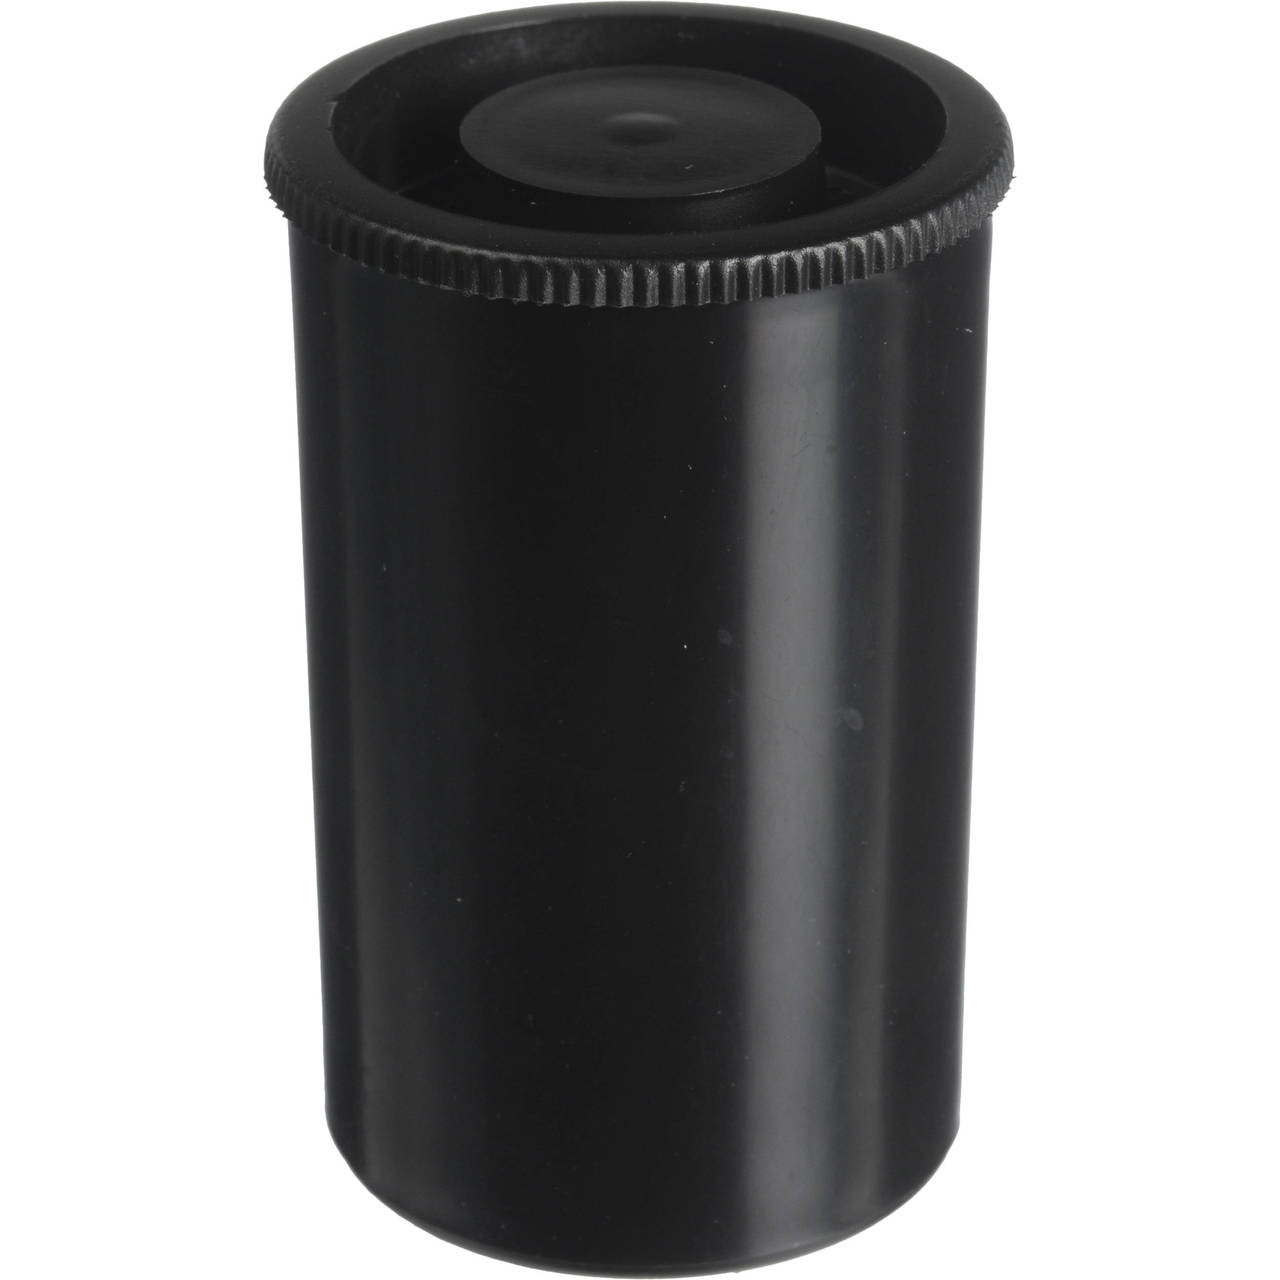 AHUNTTER 100PCS 35mm Black Camera Film Canisters with Lids